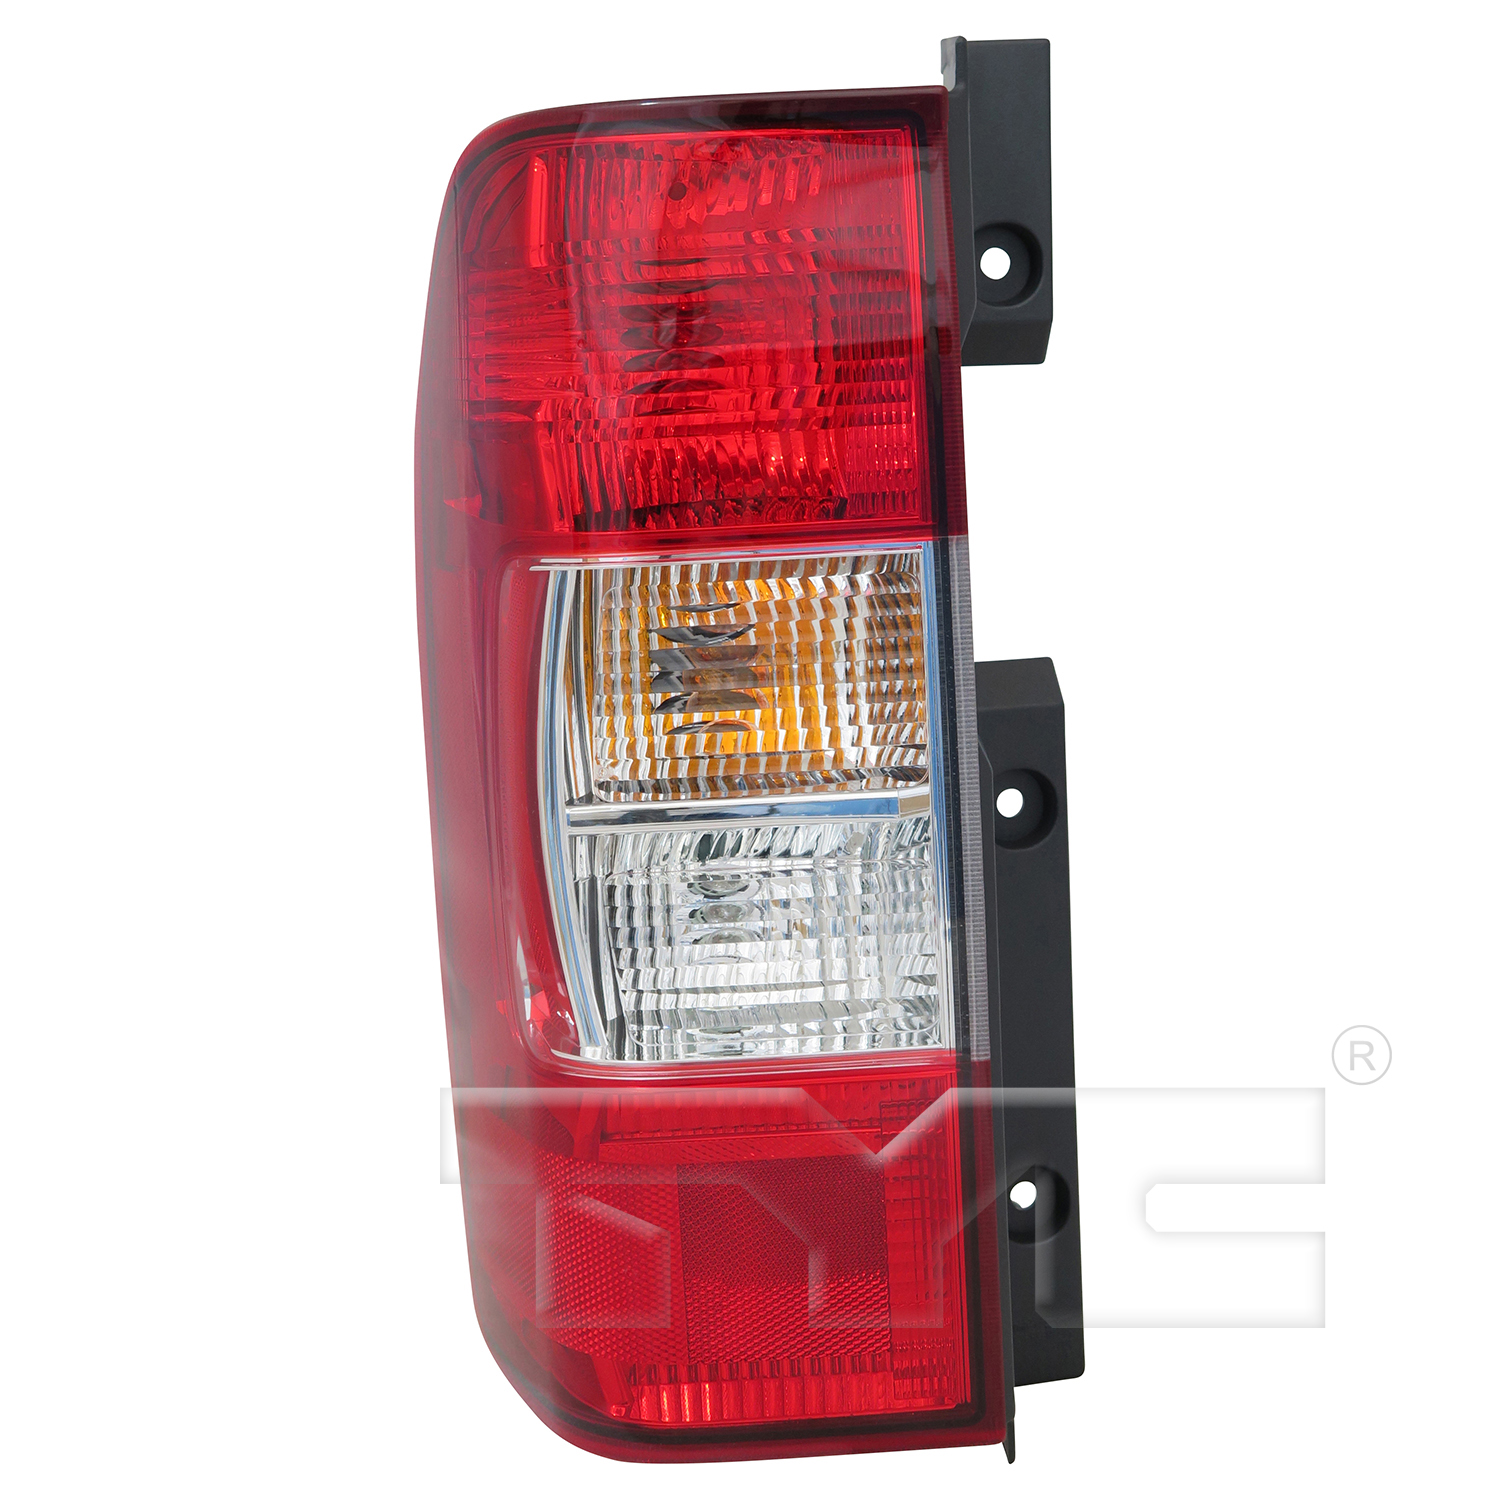 Aftermarket TAILLIGHTS for NISSAN - NV3500, NV3500,12-21,LT Taillamp assy